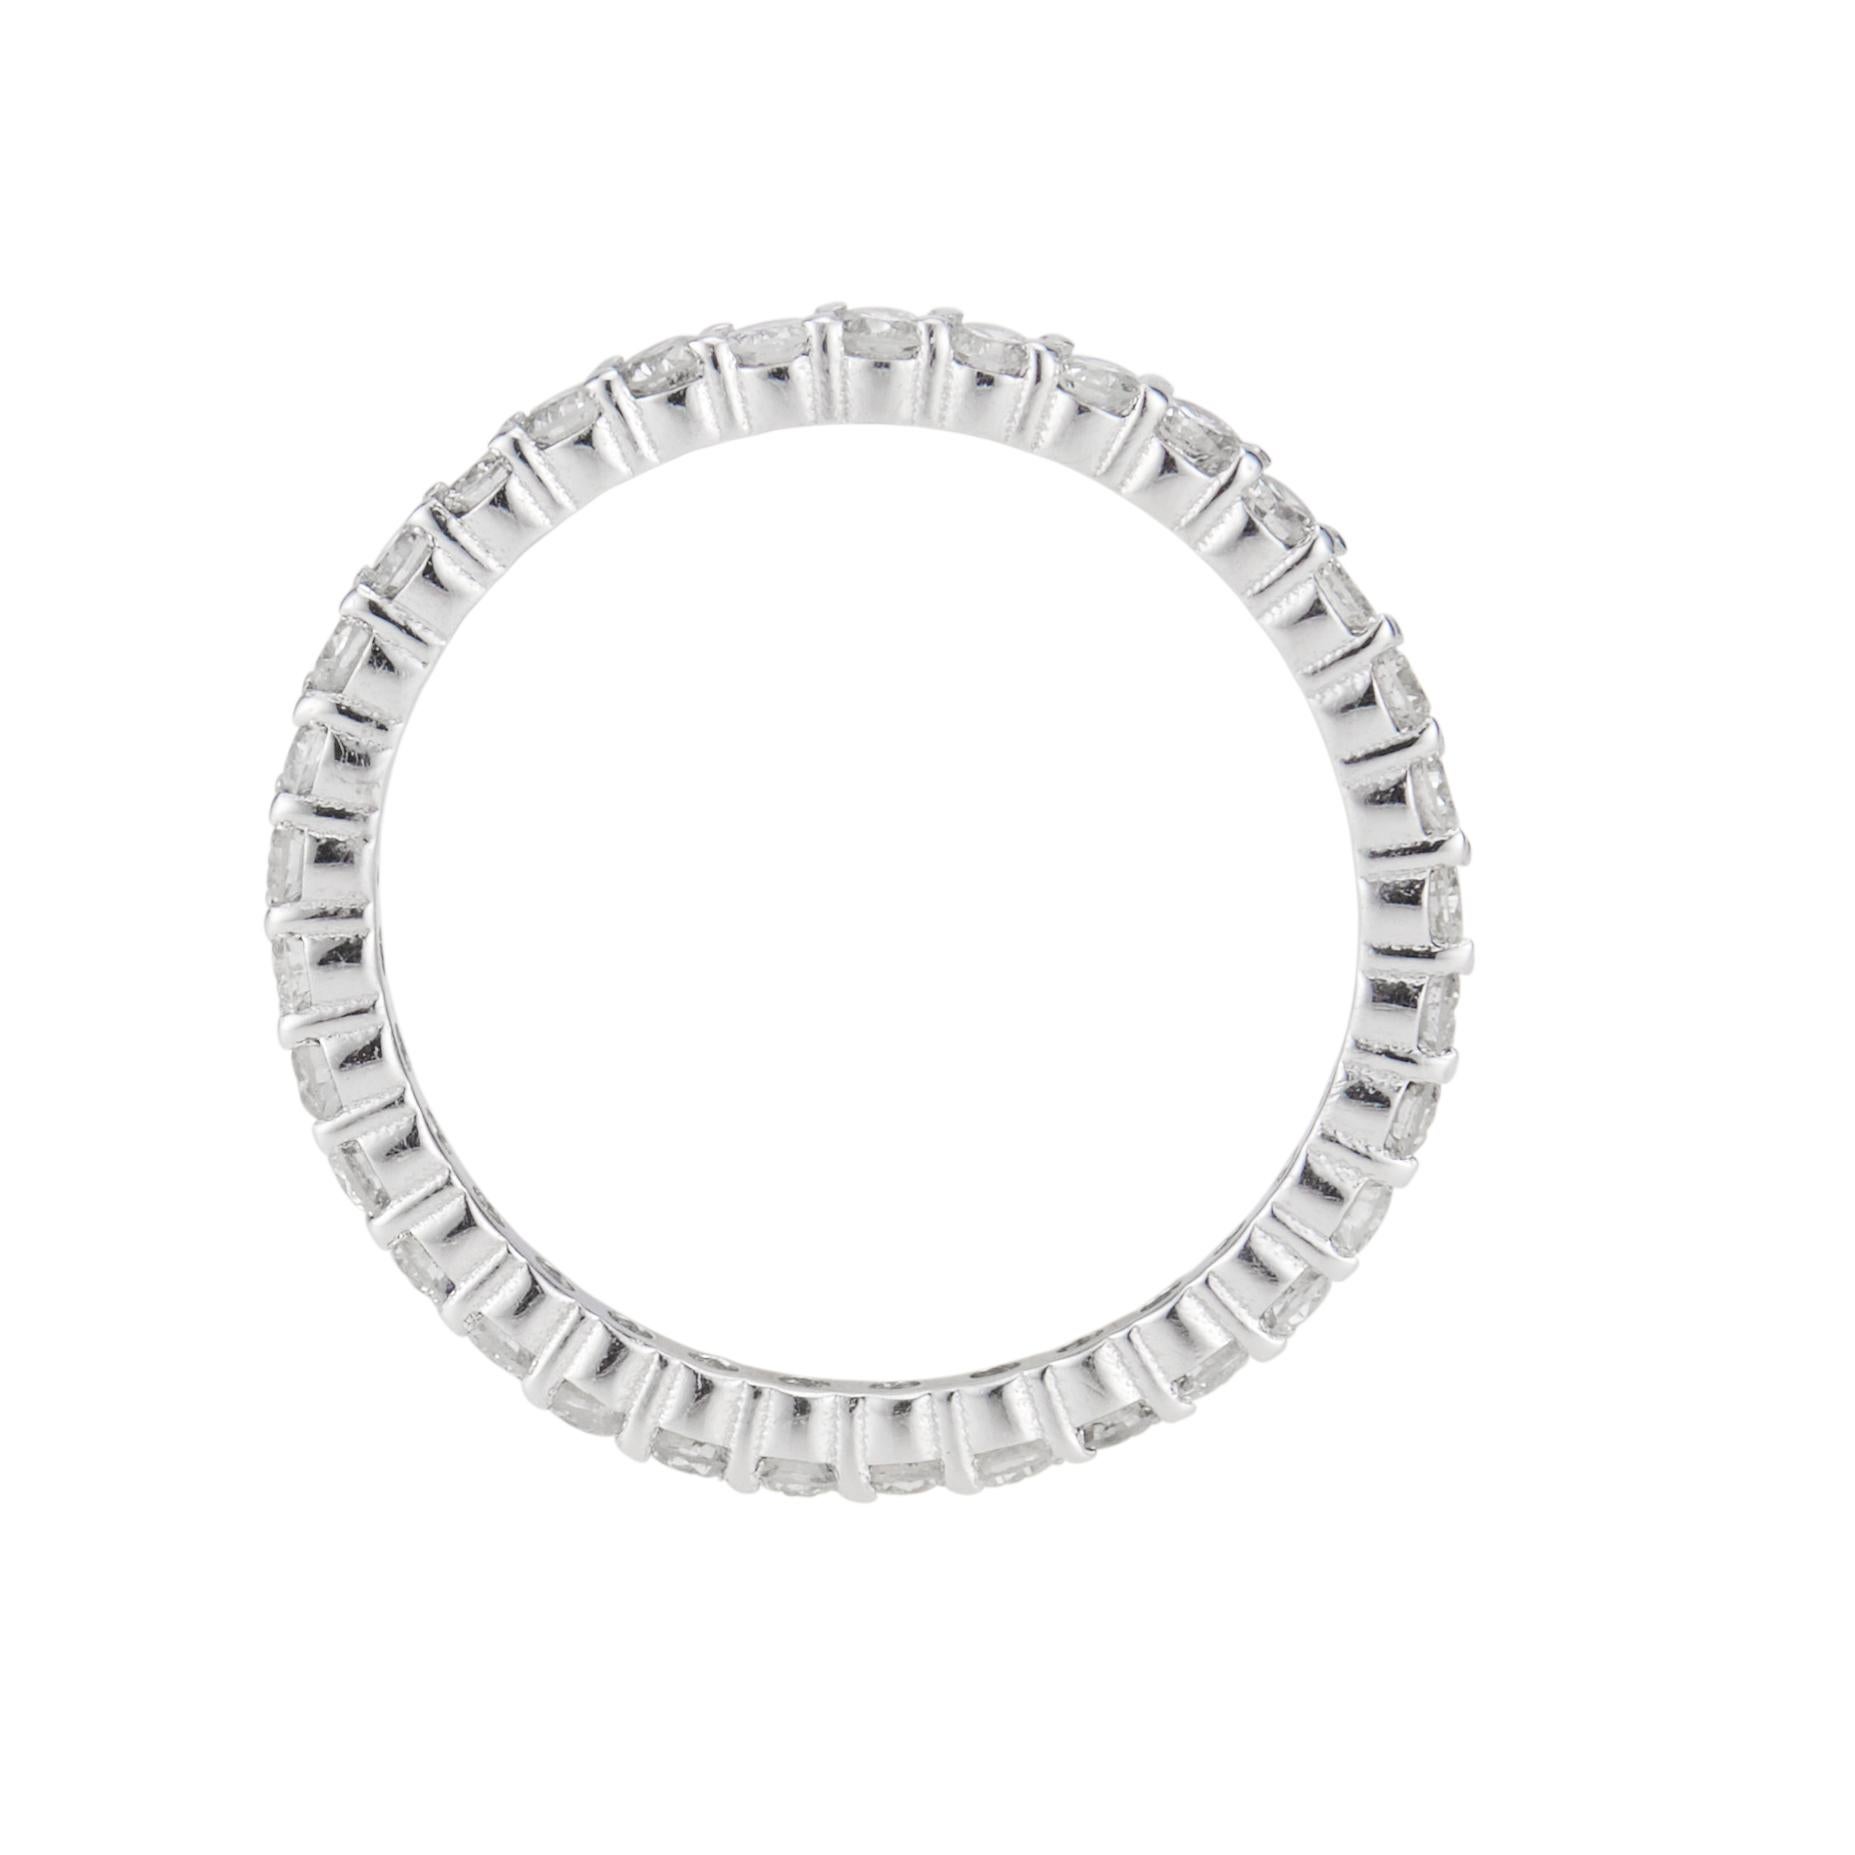 33 round brilliant cut diamond wedding band in a Platinum eternity band setting.  

33 round brilliant cut diamonds, G-H SI approx. .70cts
Size 5.75 and sizable 
Platinum 
2.0 grams
Width at top: 1.8mm
Height at top: 2.0mm
Width at bottom: 1.78
